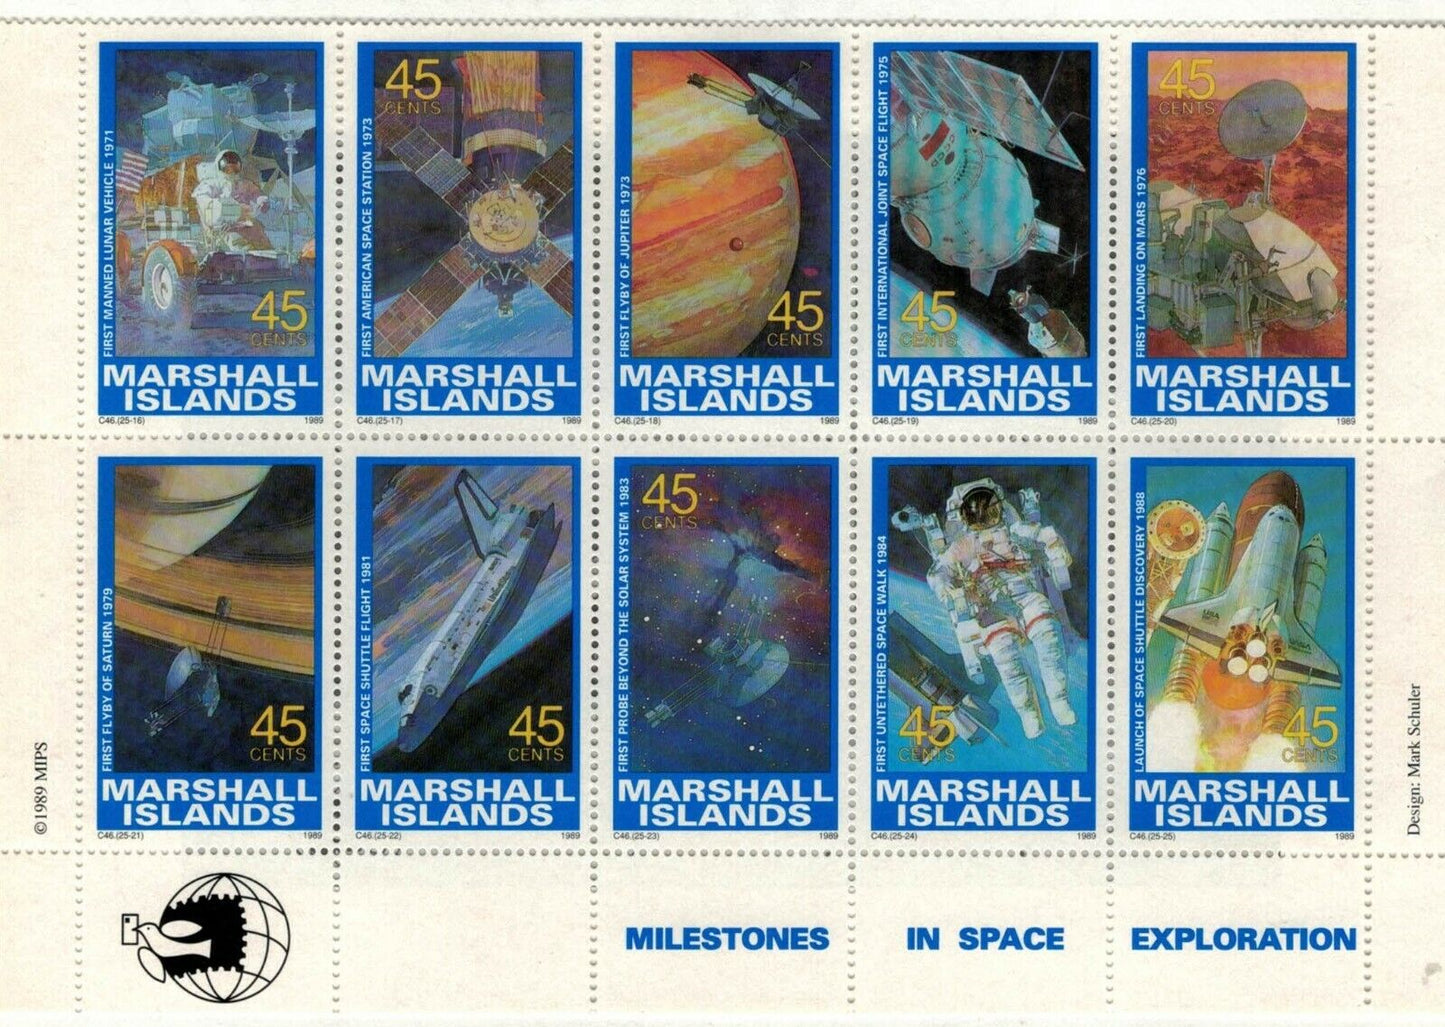 ZAYIX - 1989 Marshall Islands #345 MH - Space Exploration - Rockets - Planets